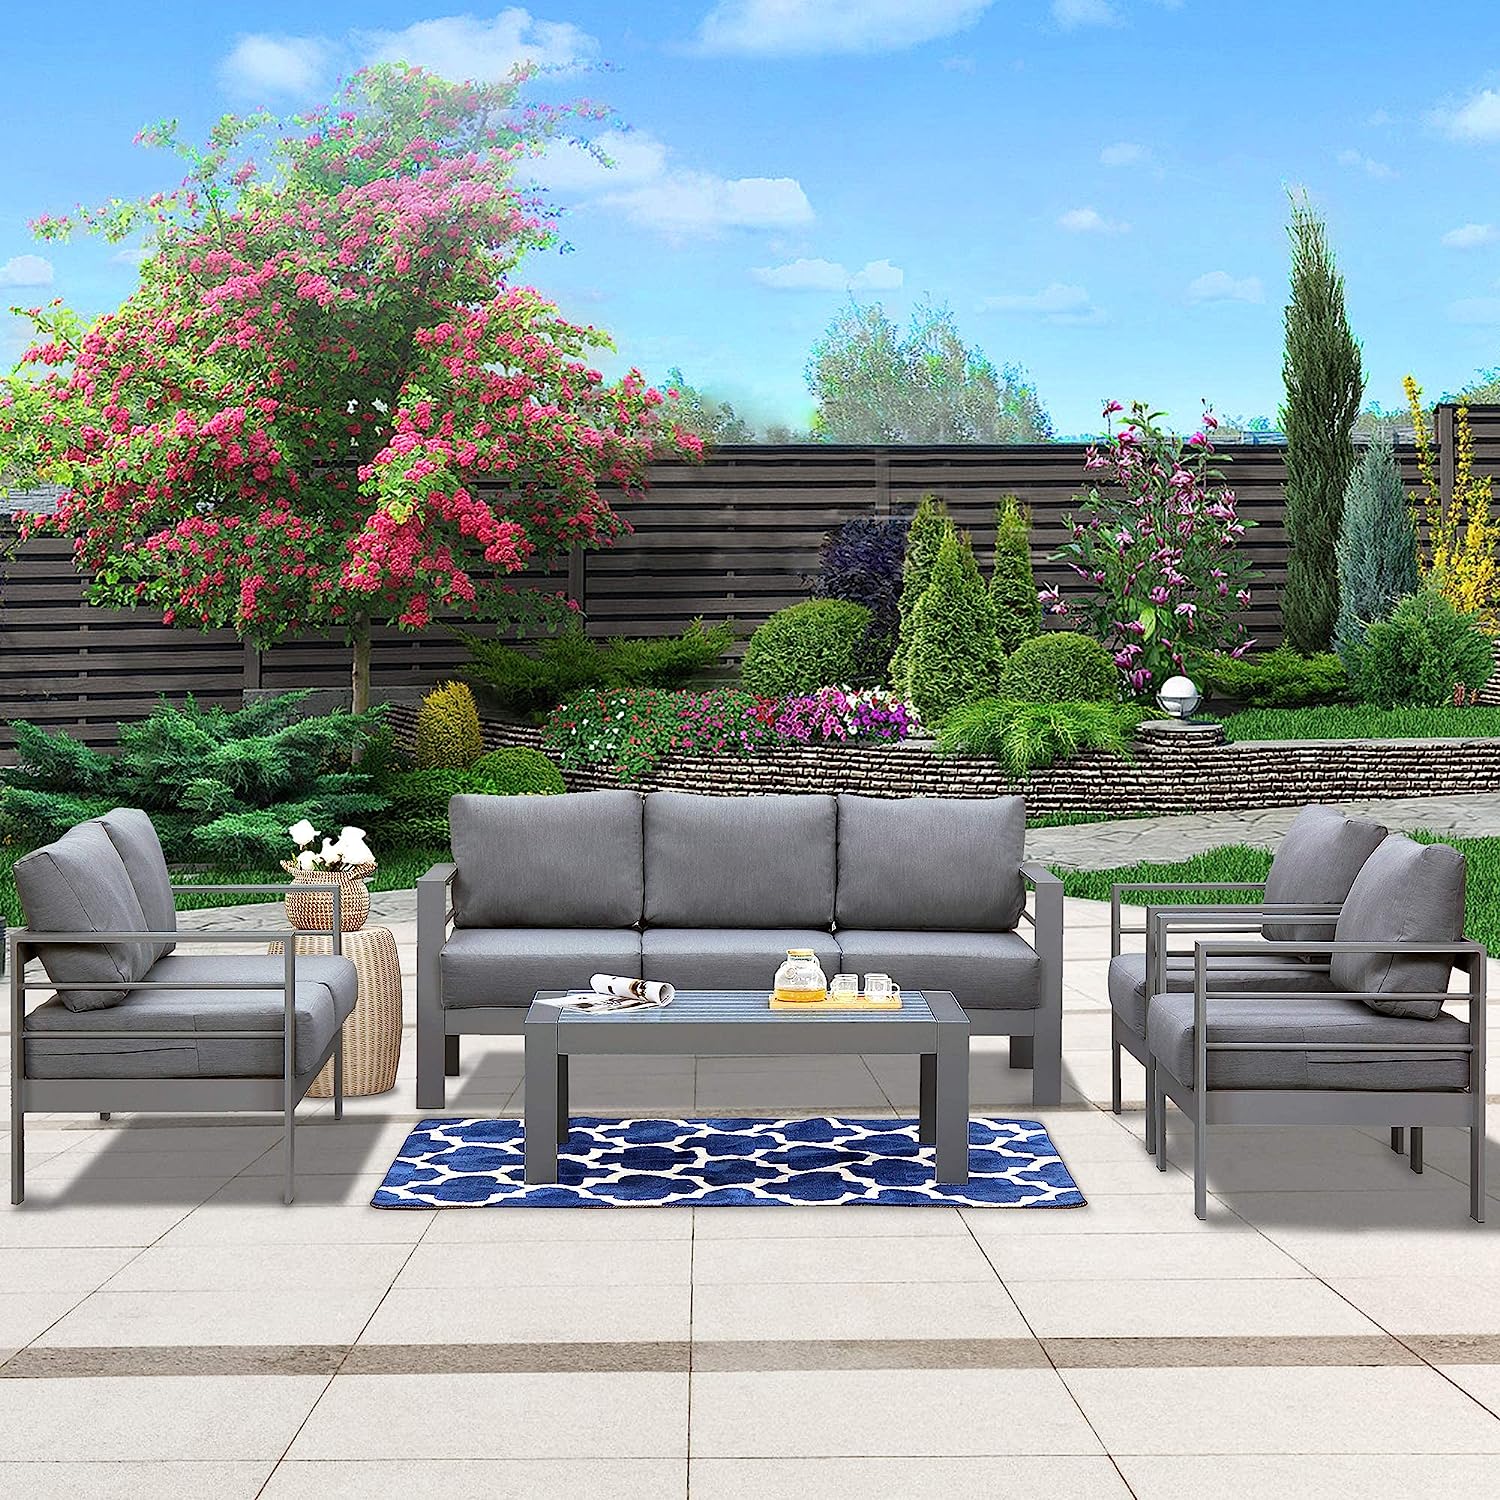 Superjoe Pcs Outdoor Aluminum Furniture Set Seats Patio Sectional Chat  Sofa Set Metal Conversation Sofa with Inch Cushion and Coffee Table for  Balcony, Garden, Dark Grey